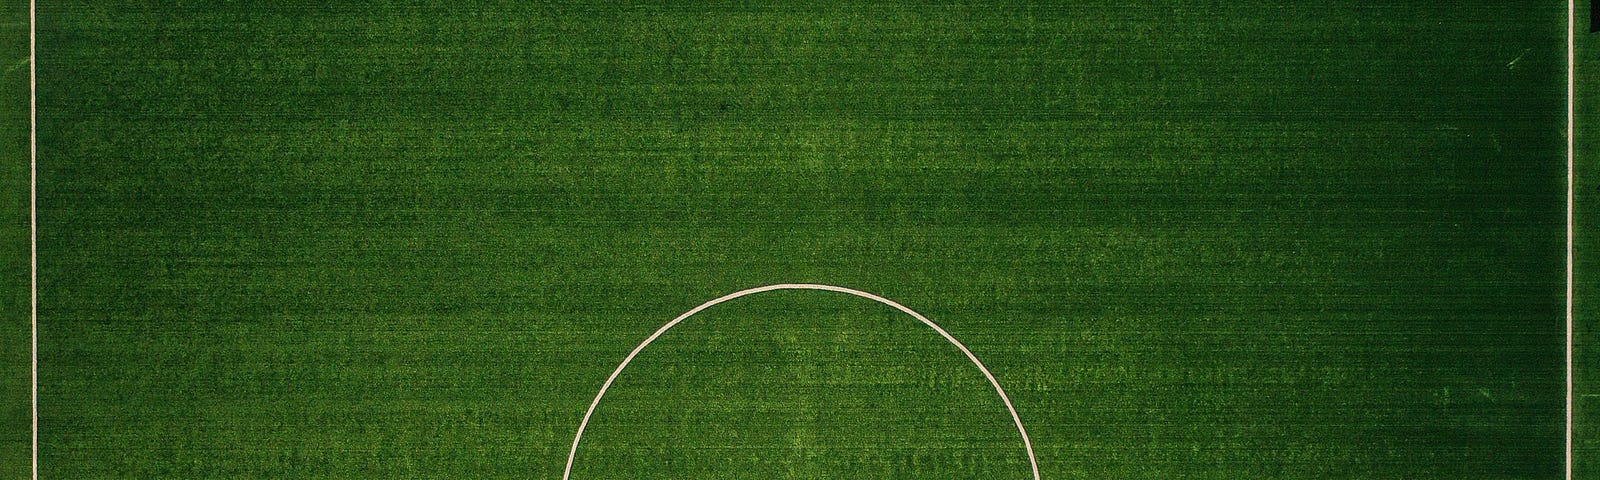 Aerial view of a football (soccer) pitch